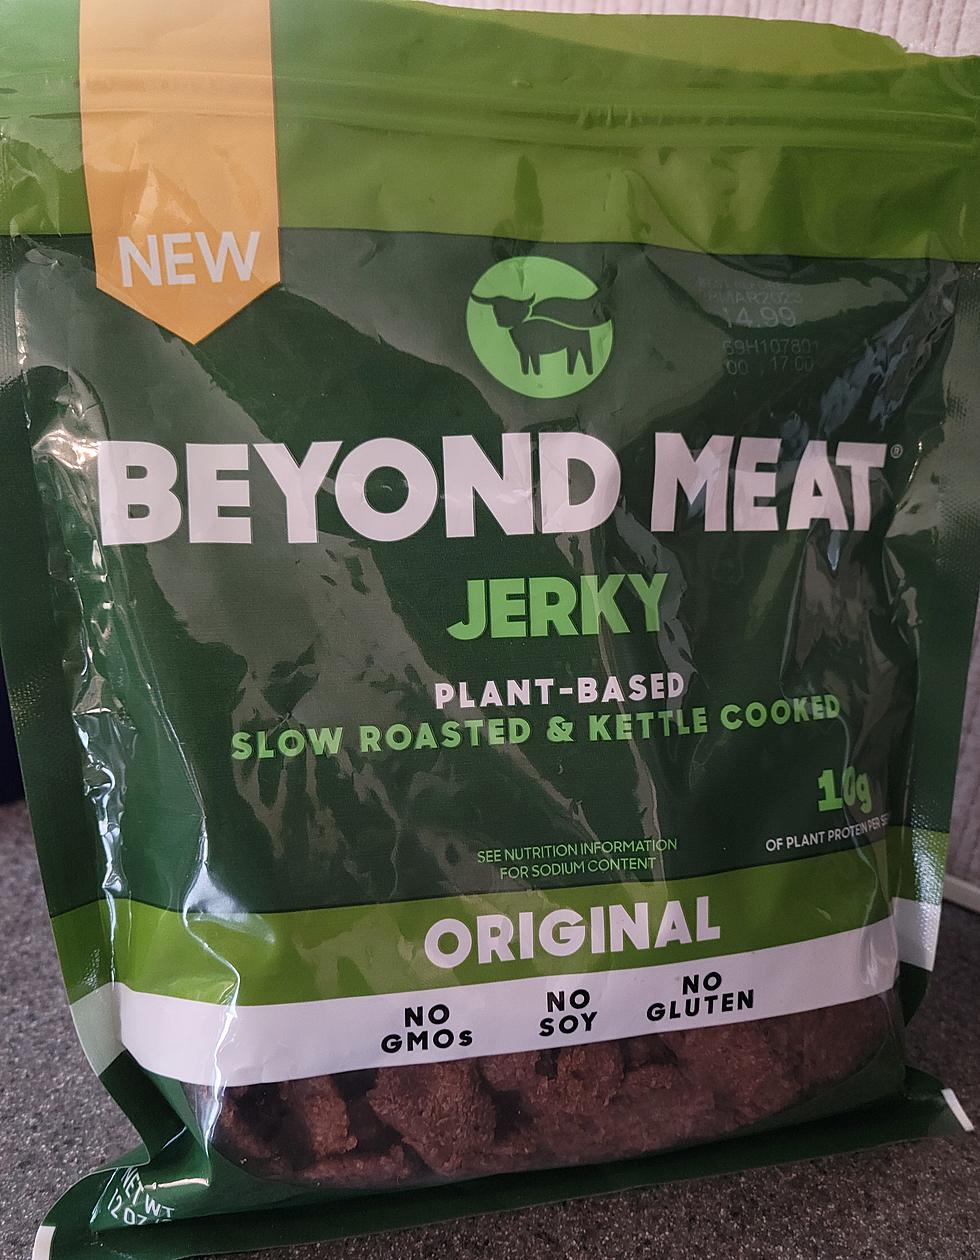 What Did this Plant-Based Jerky Taste Like?